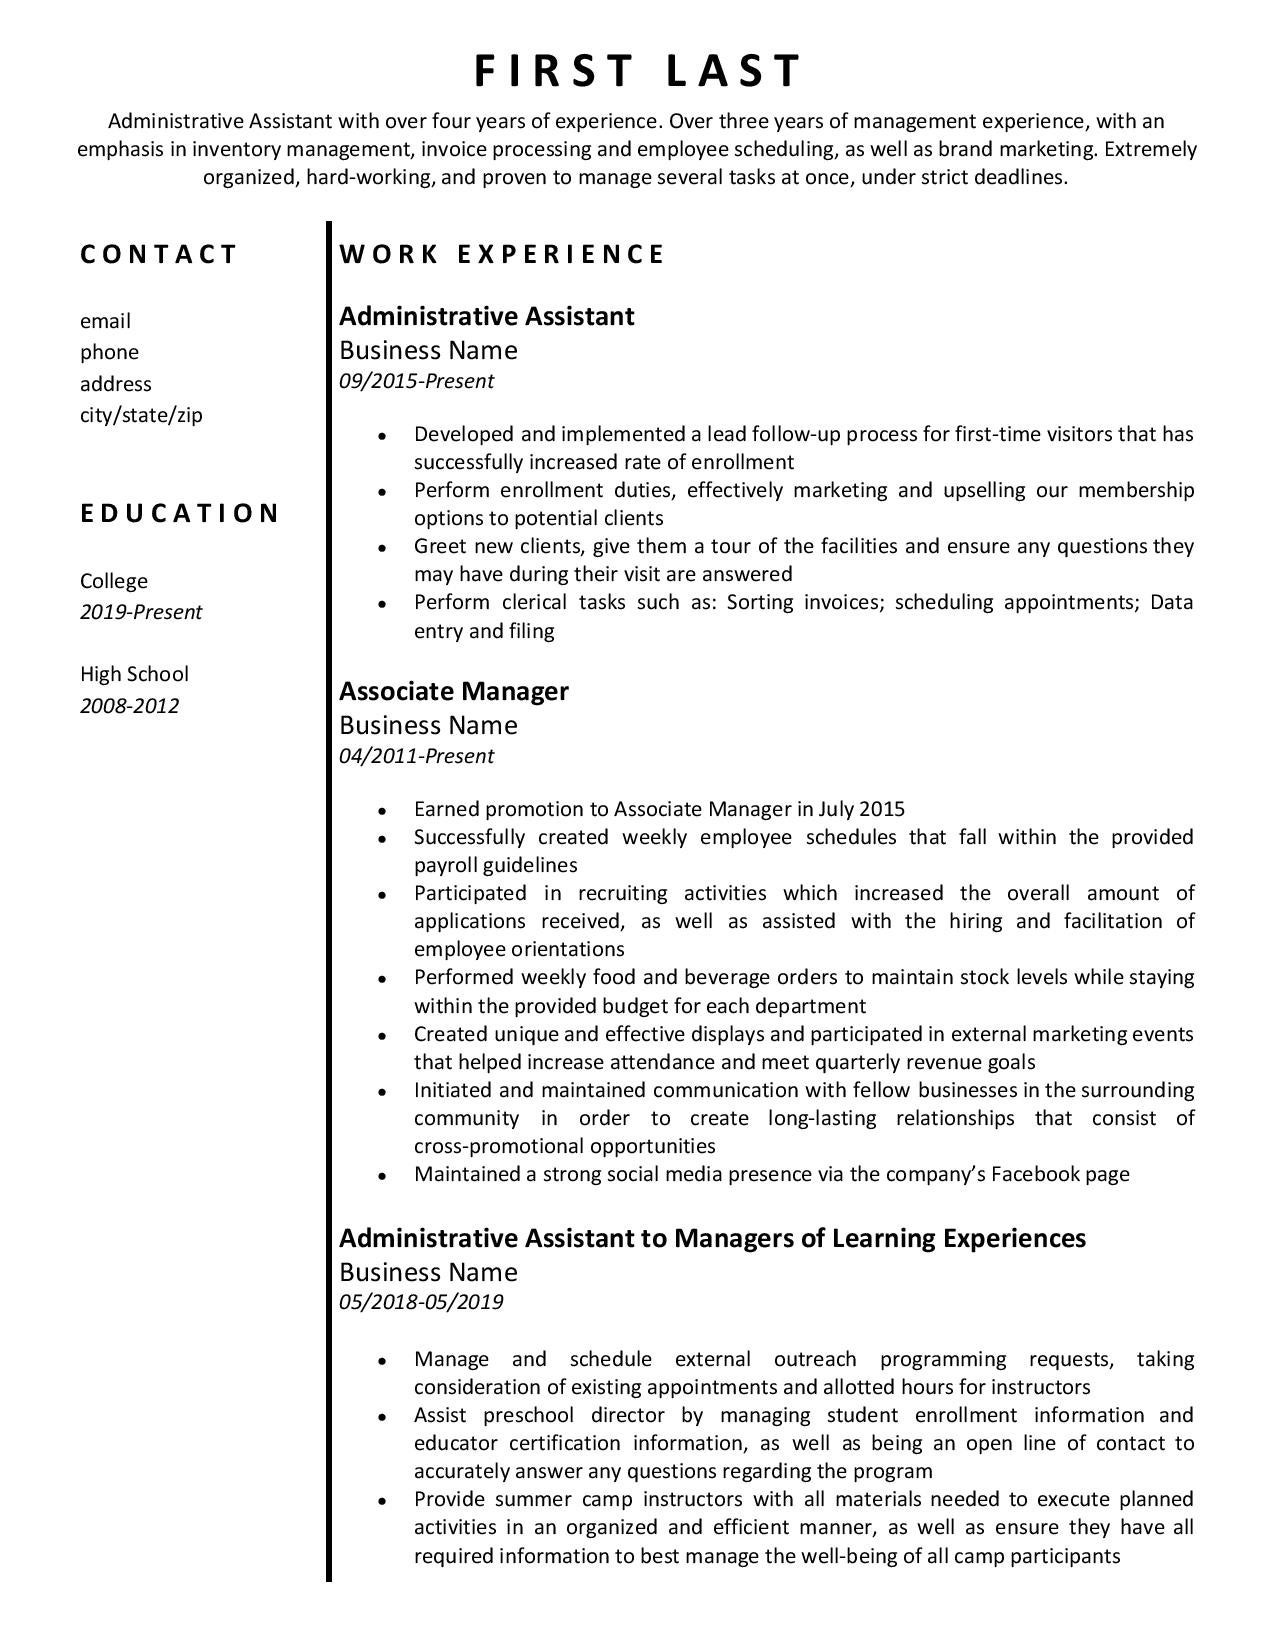 Sample Resume with Different Positions at Same Company Help! – Multiple Positions within Same Company and On/off …